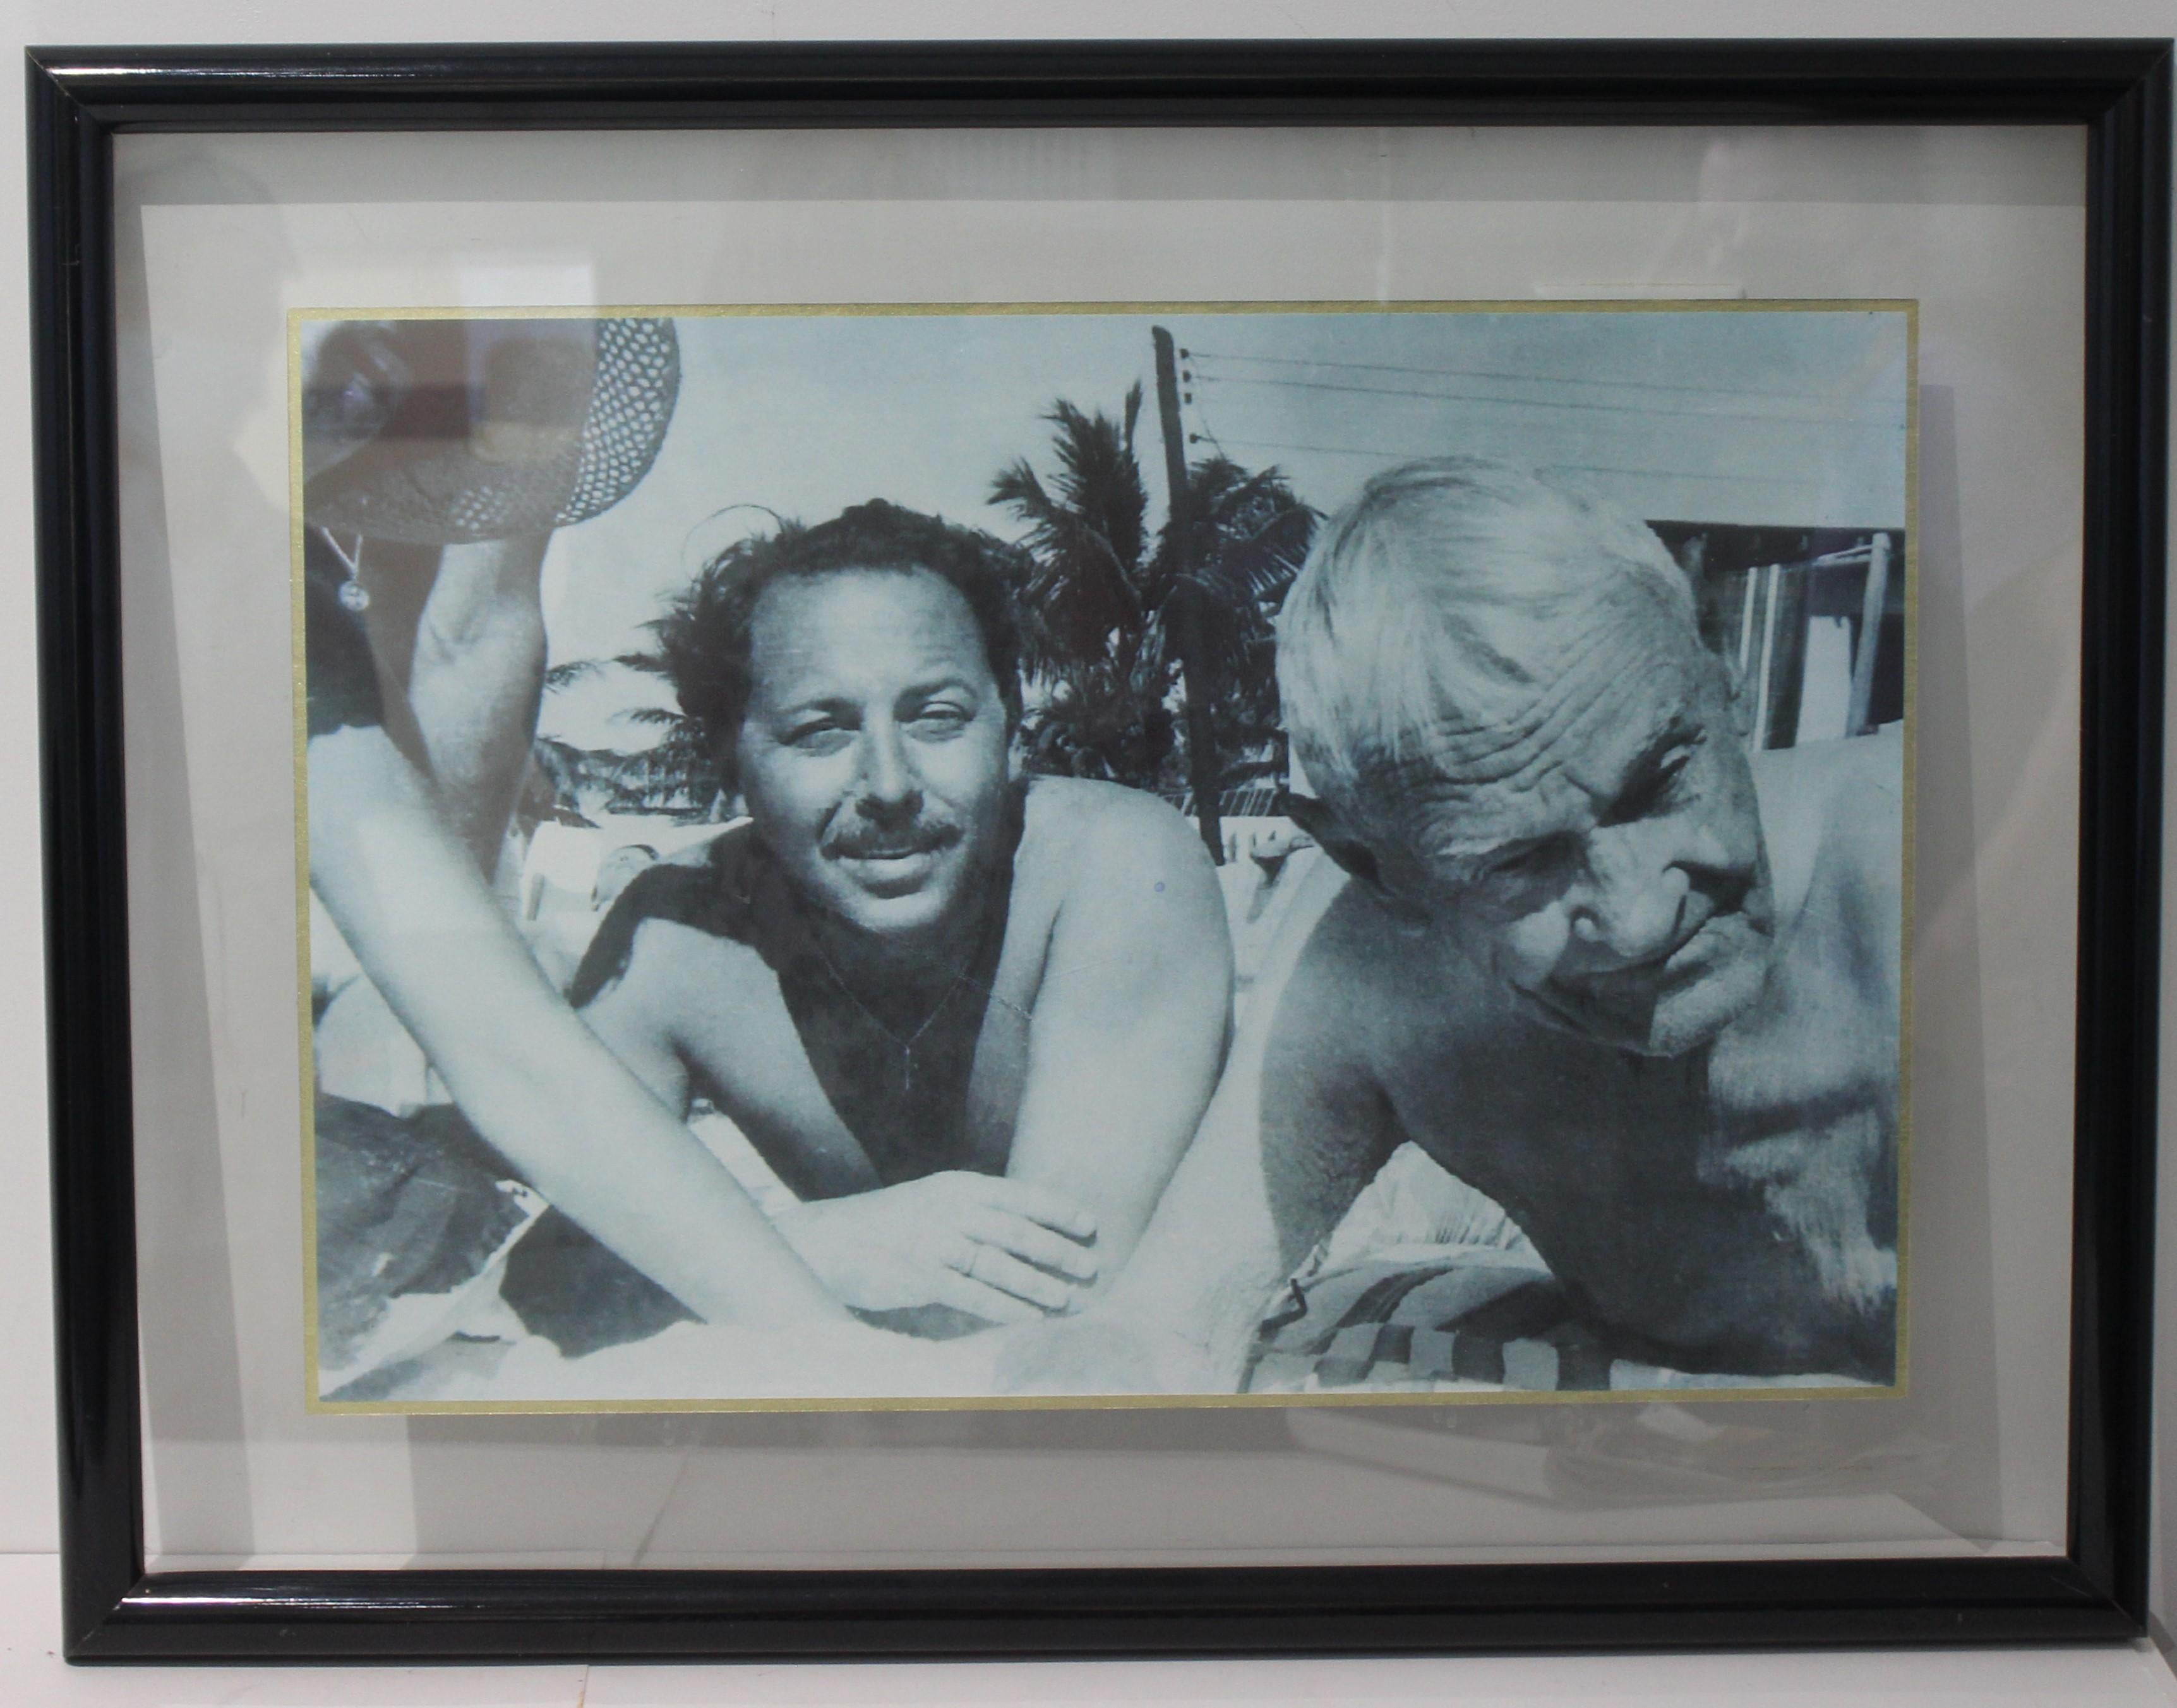 Mid-century photograph Tennessee Williams in Key West from a Key West estate

Frame size 22 1/4 x 29 1/4 x 1
Image size 15 x 22

the photograph has a slight bluish cast

Tennessee Williams is known as one of the greatest 20th century American